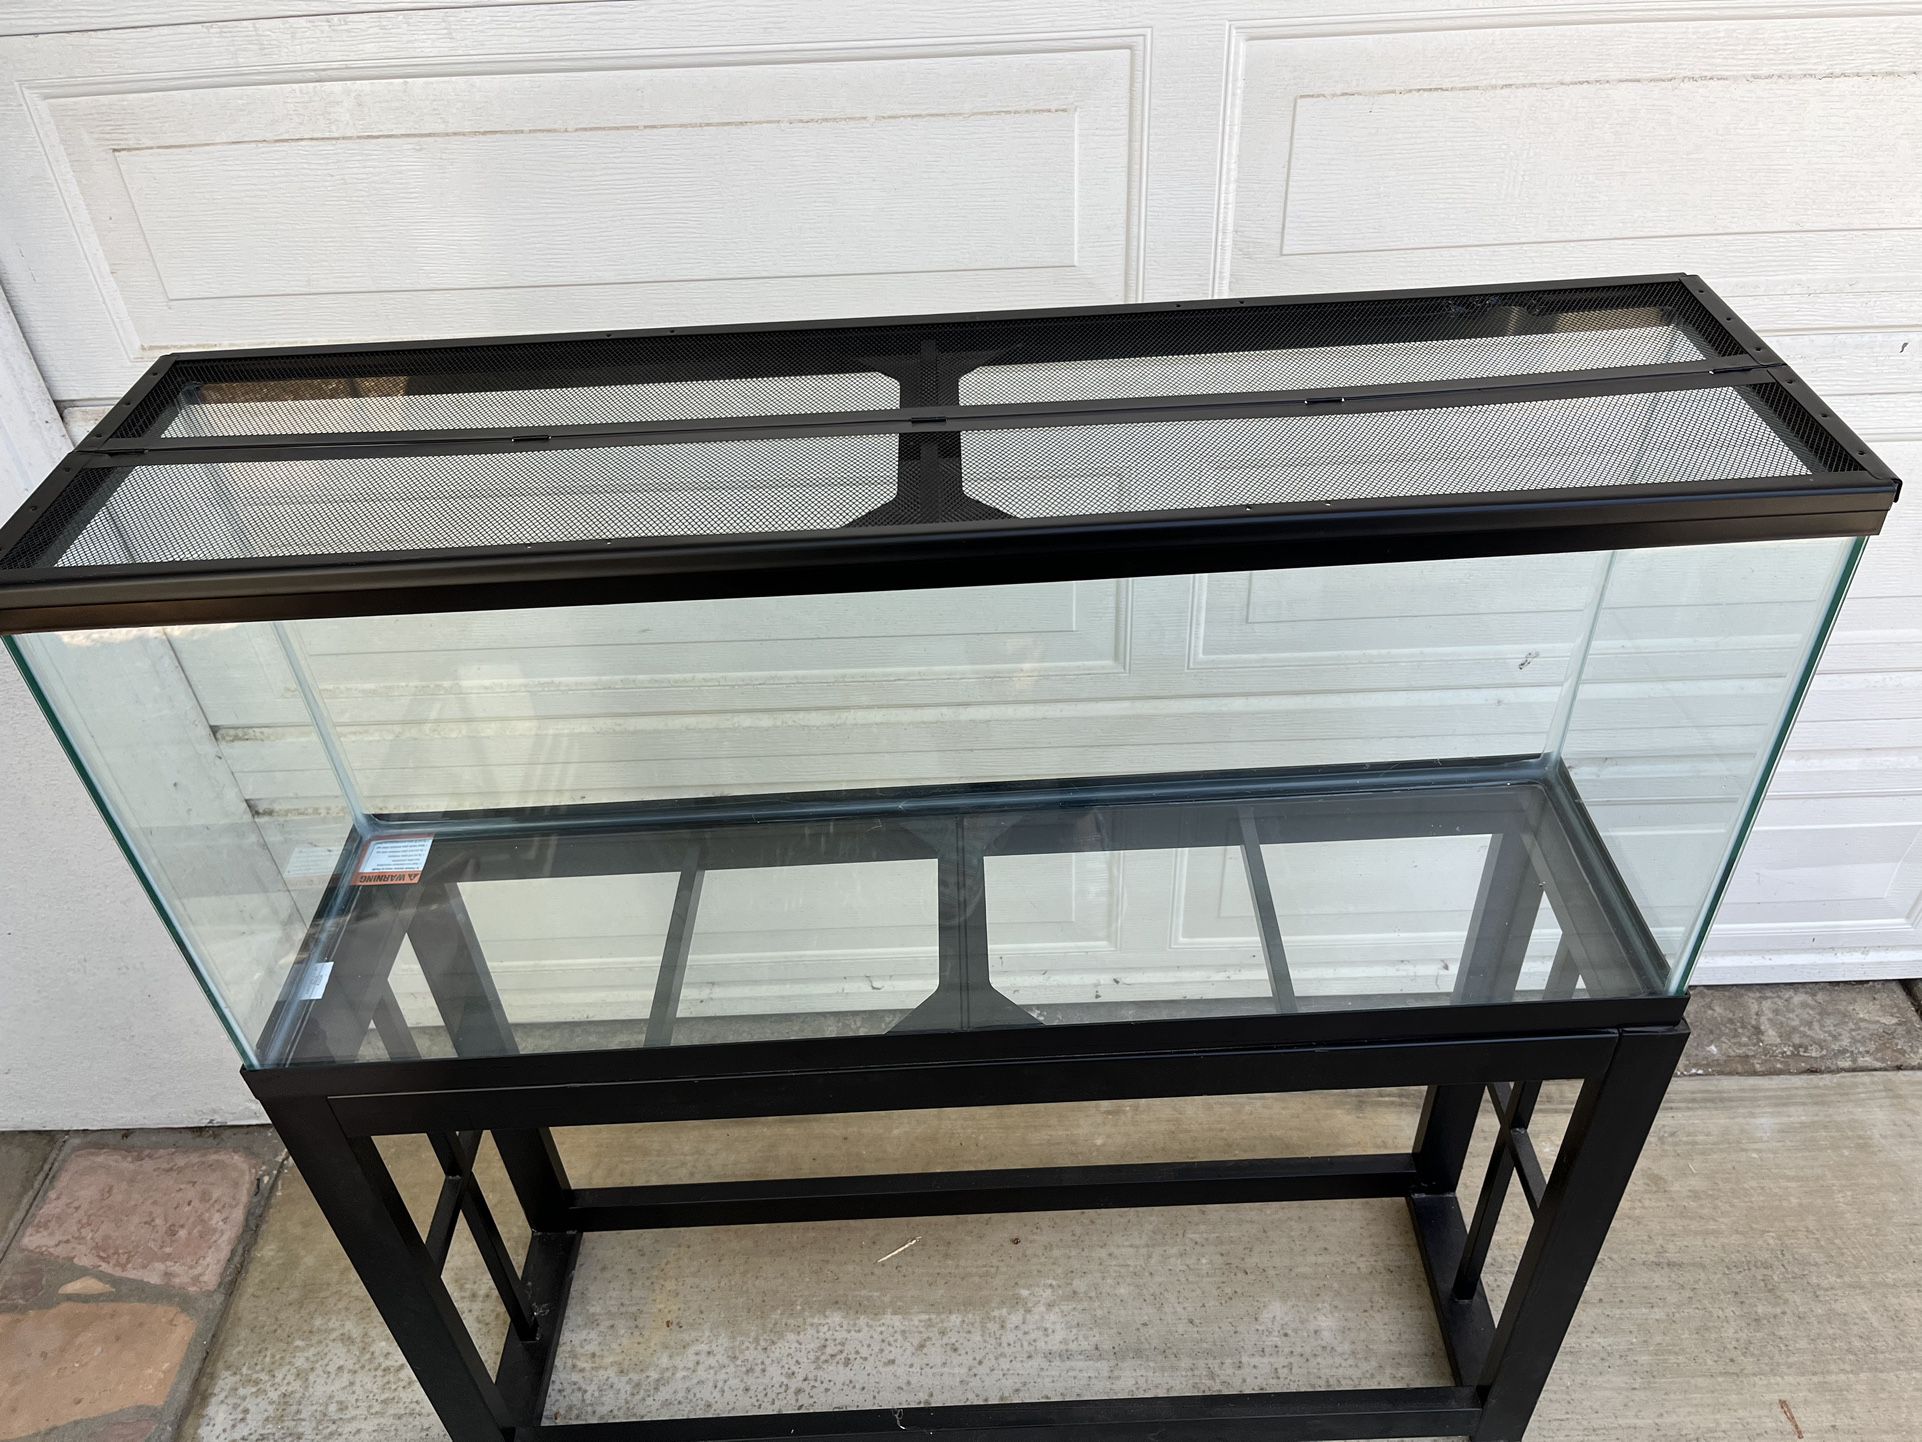 55 Gallon Tank and Stand